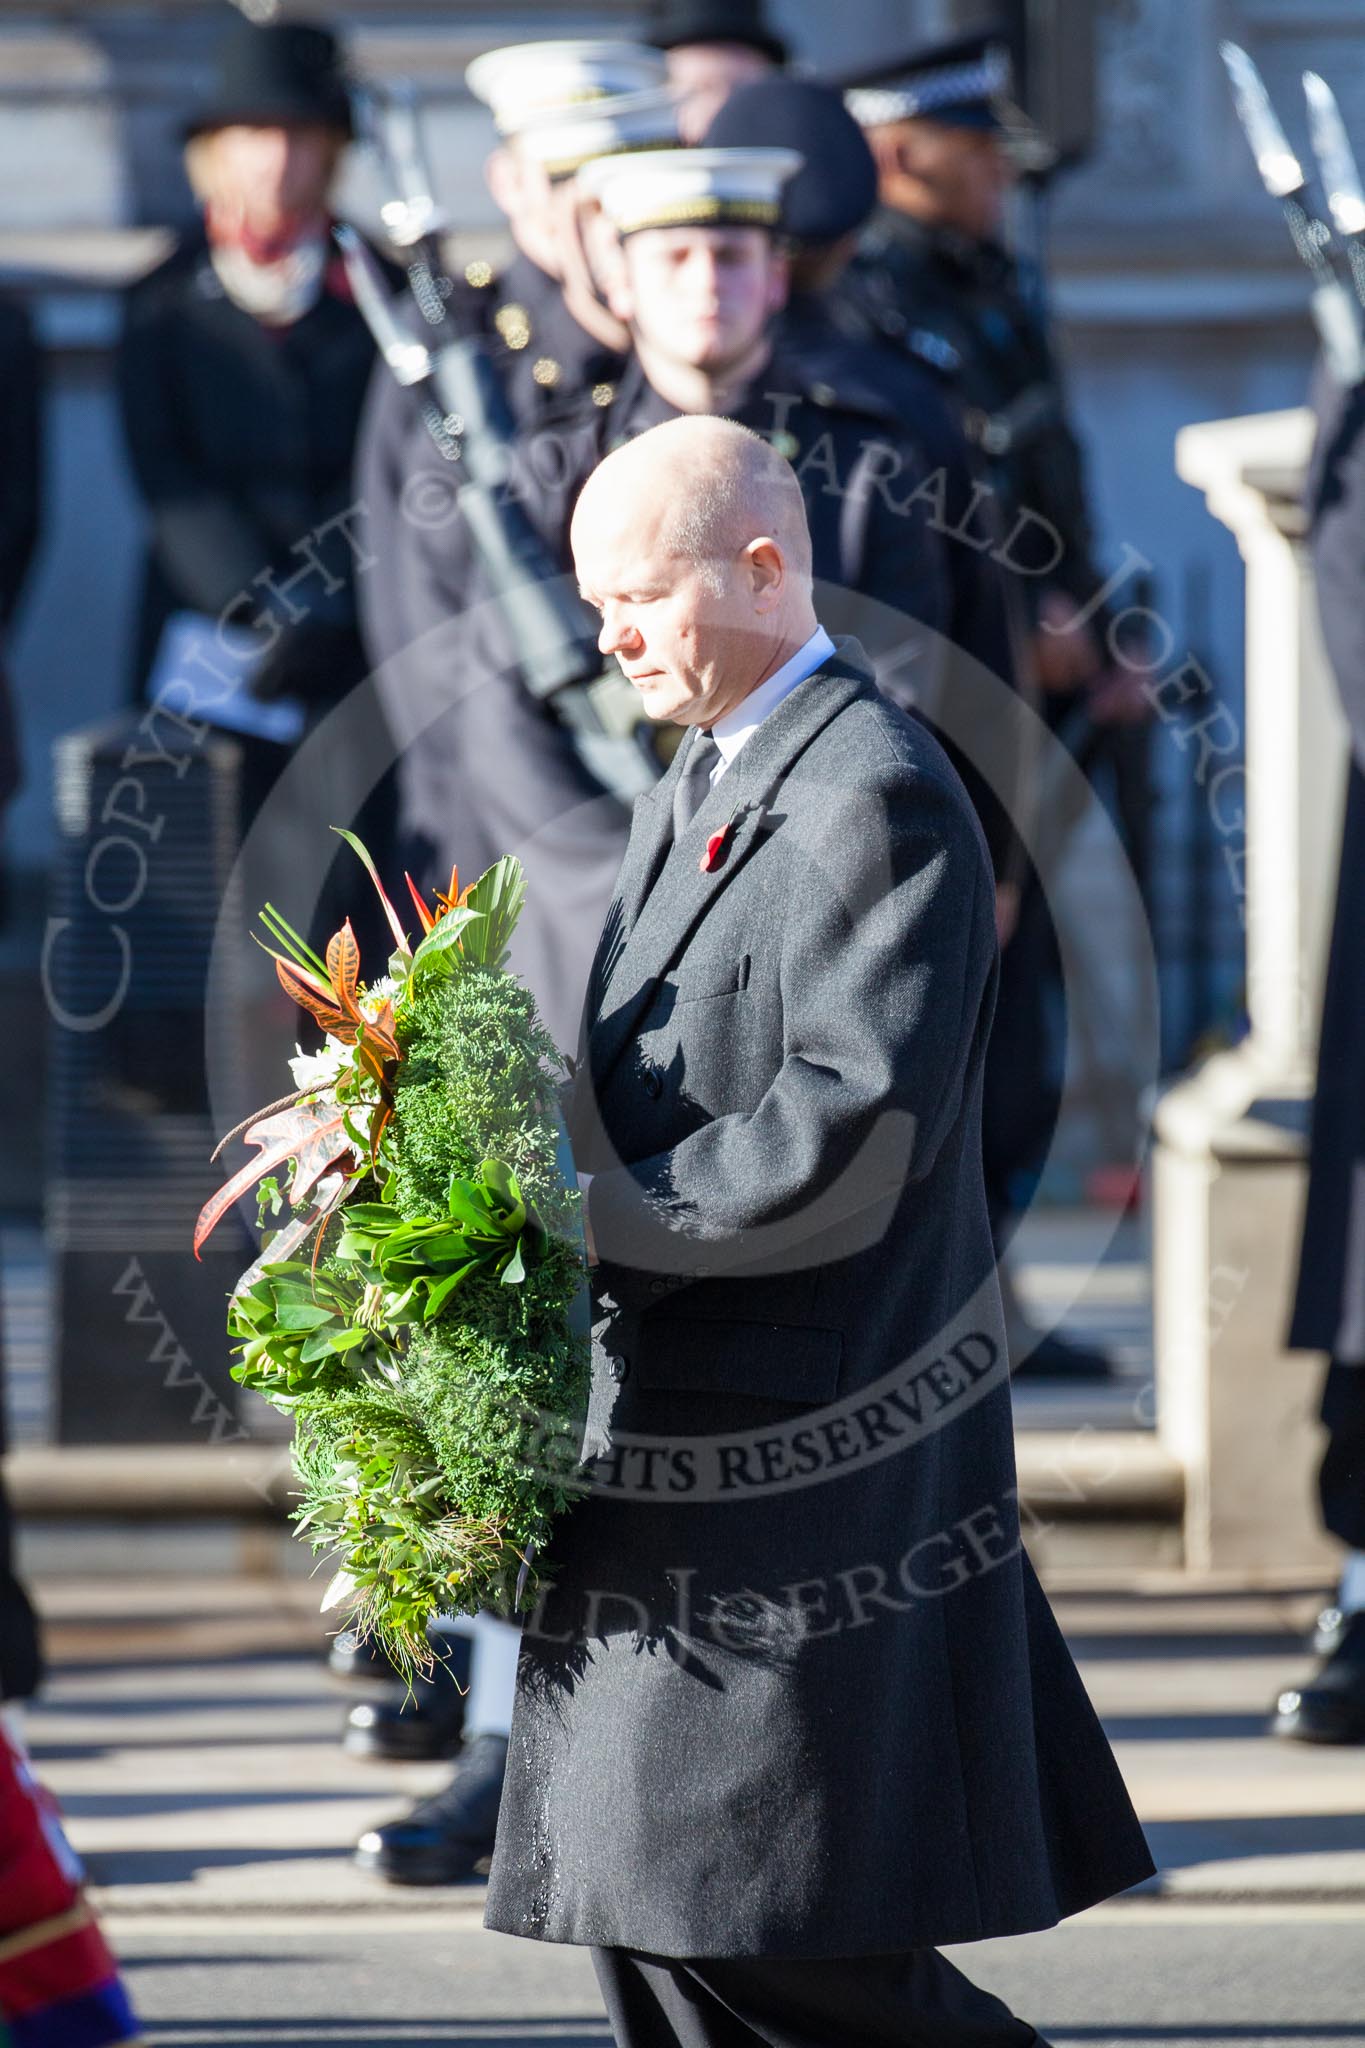 The Foreign Secretary, William Hague, about to lay a wreath at the Cenotaph on behalf of the Overseas Terretories.